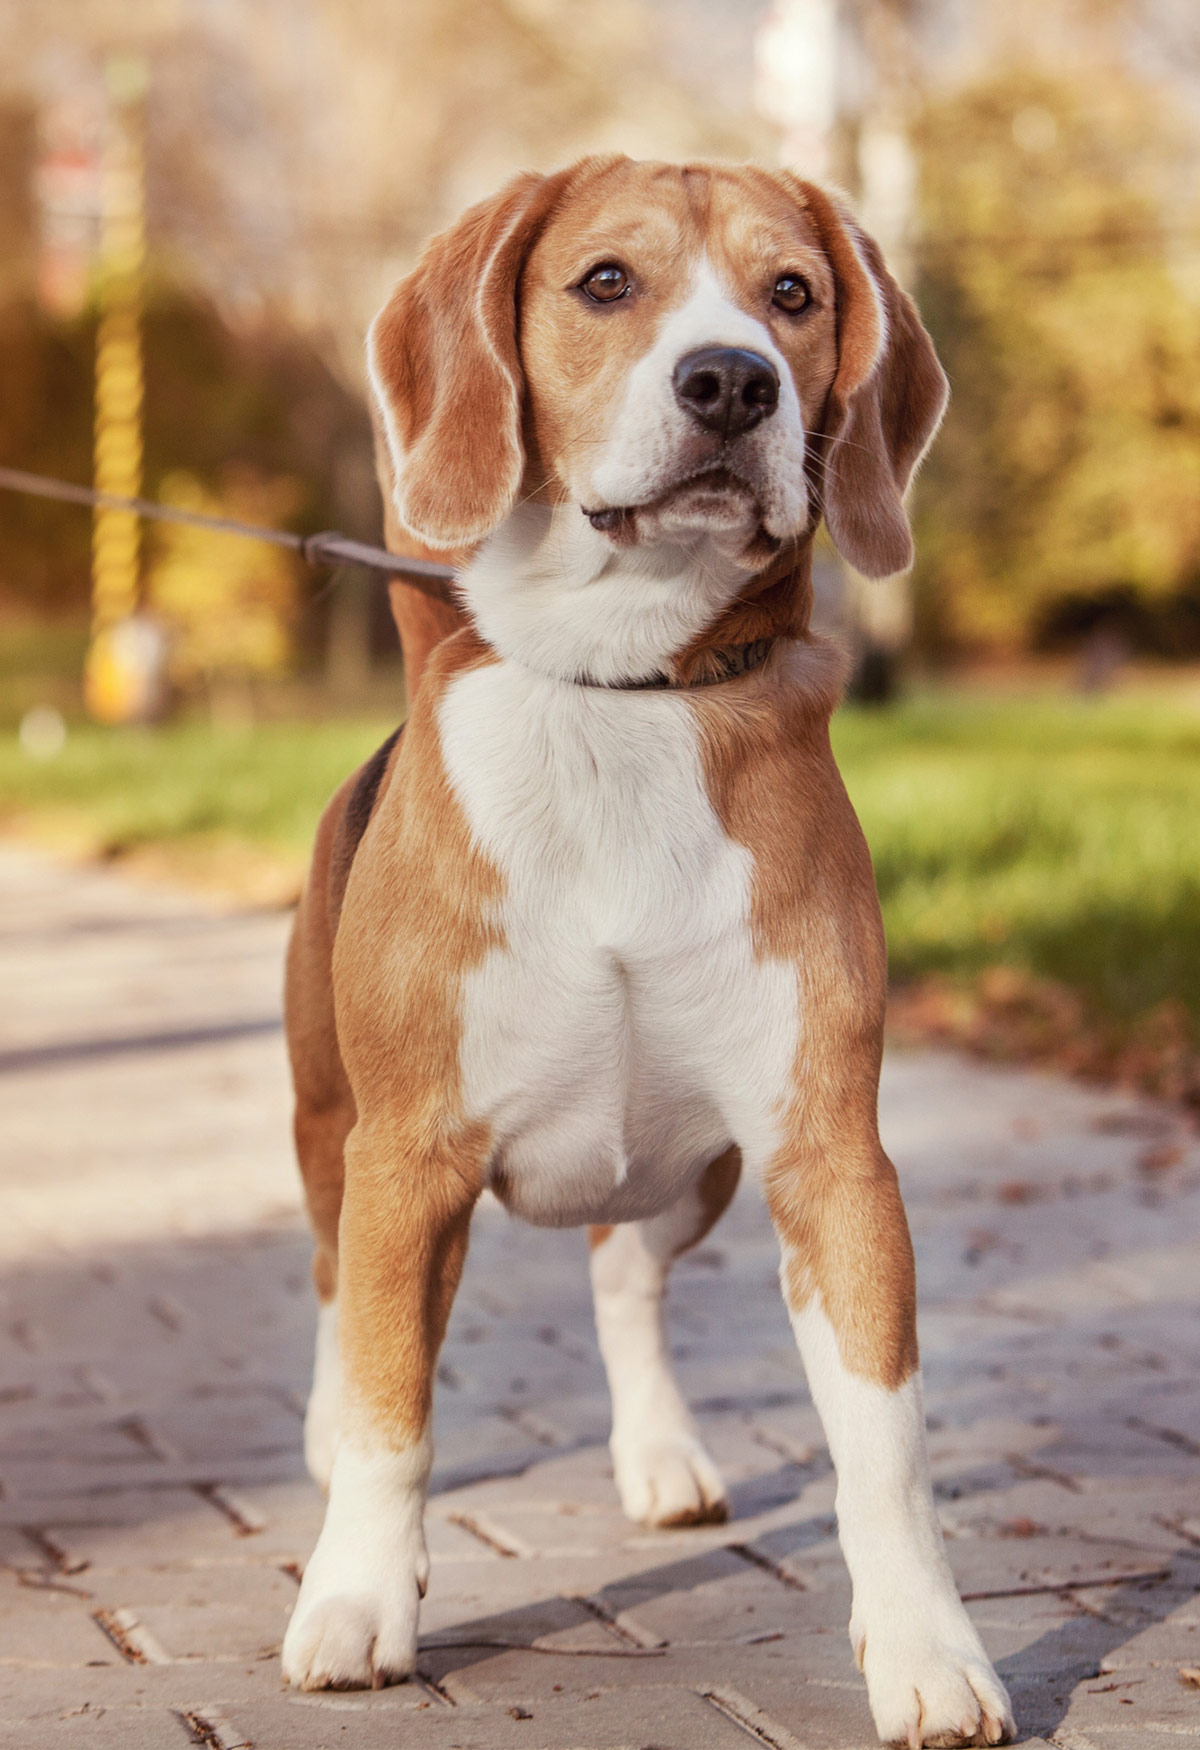 33 Fantastic Lemon Beagle Facts - From History To Present Day